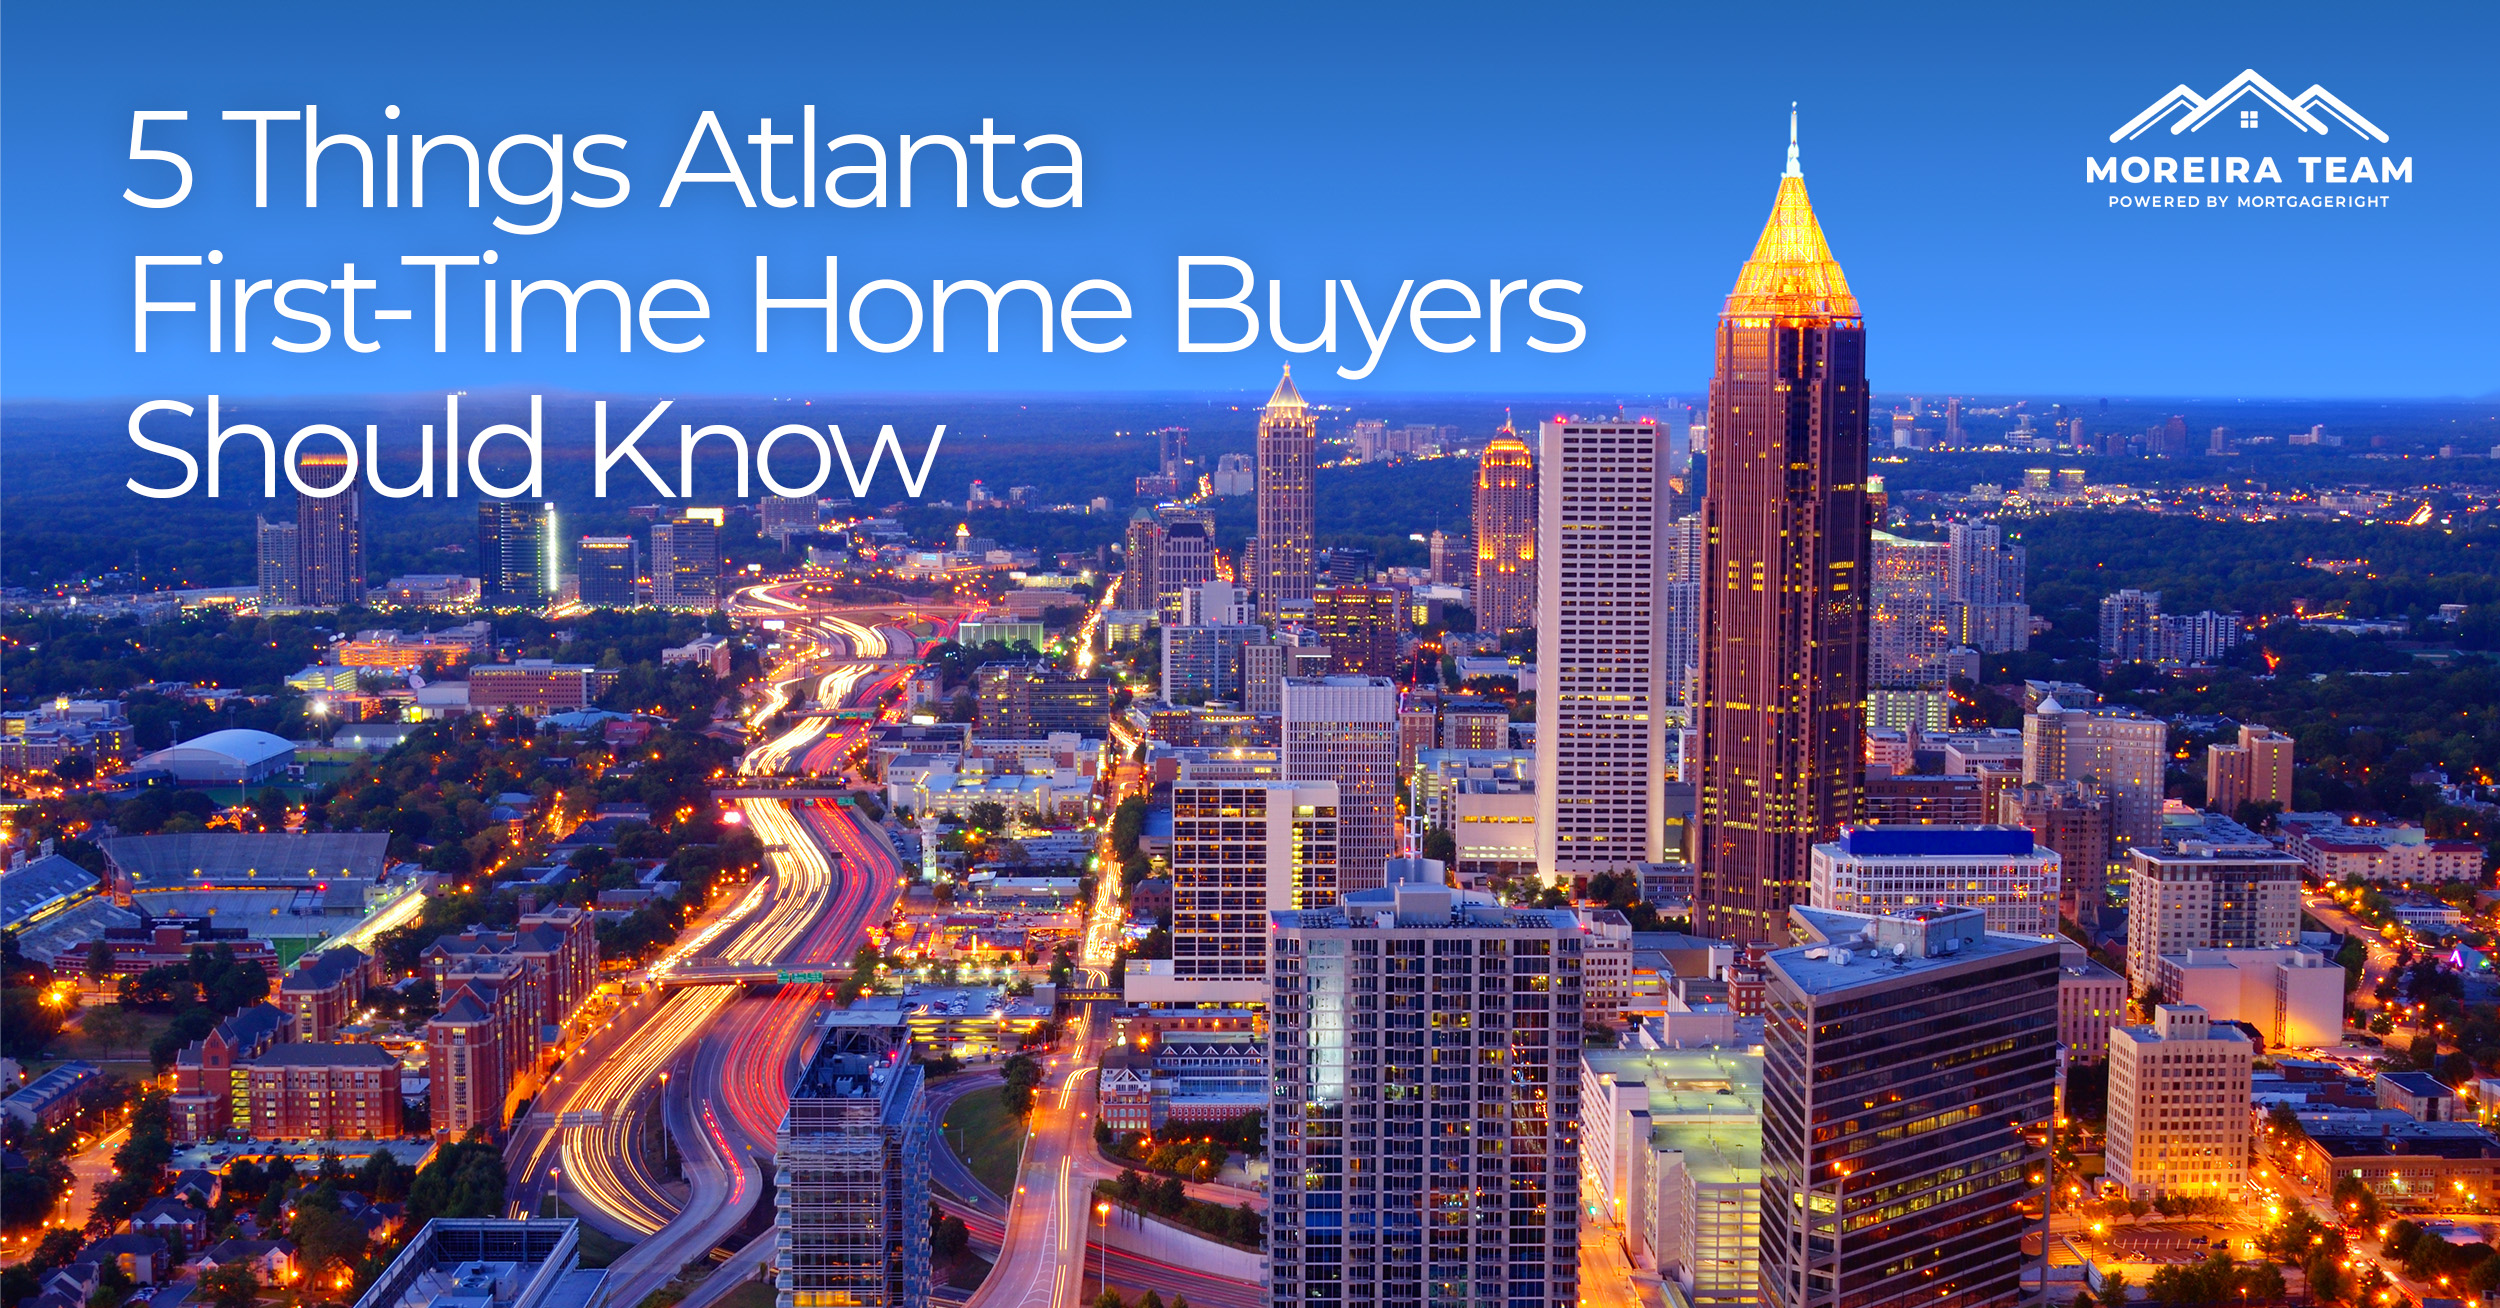 5 Things Atlanta First-Time Home Buyers Should Know